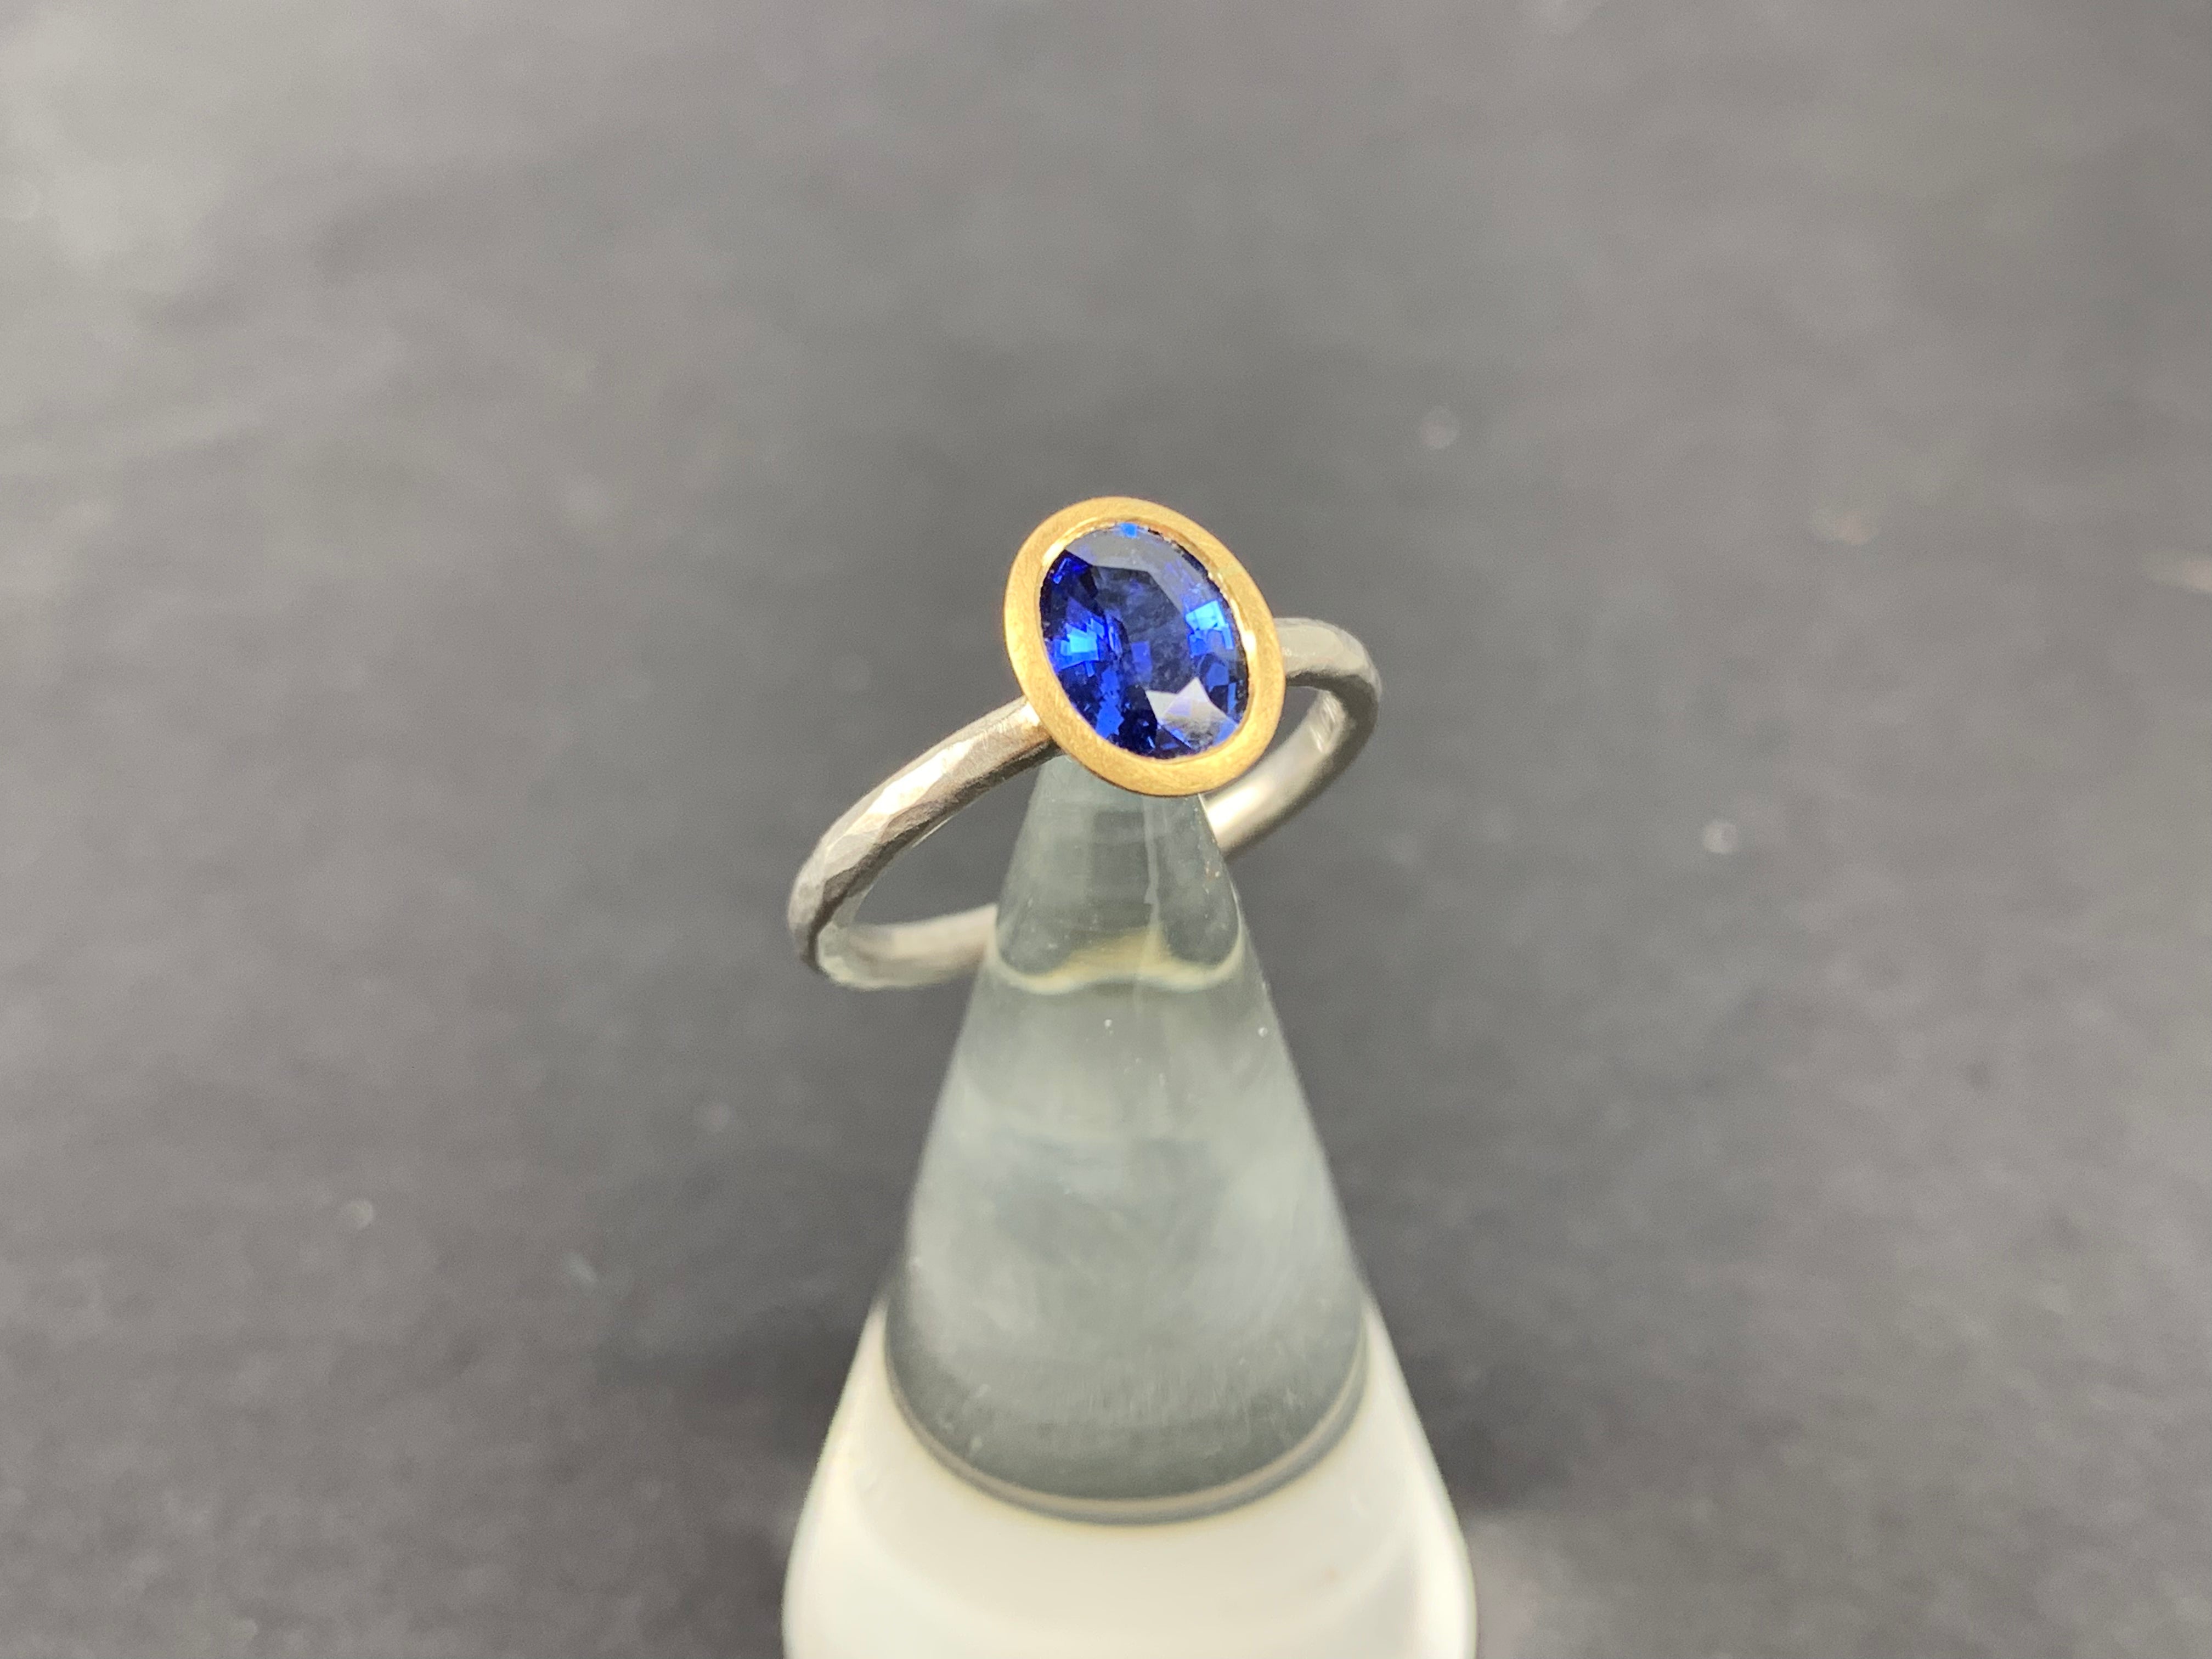 Betts, Malcolm - Platinum Ring with 18ct Gold set Sapphire, size M ...